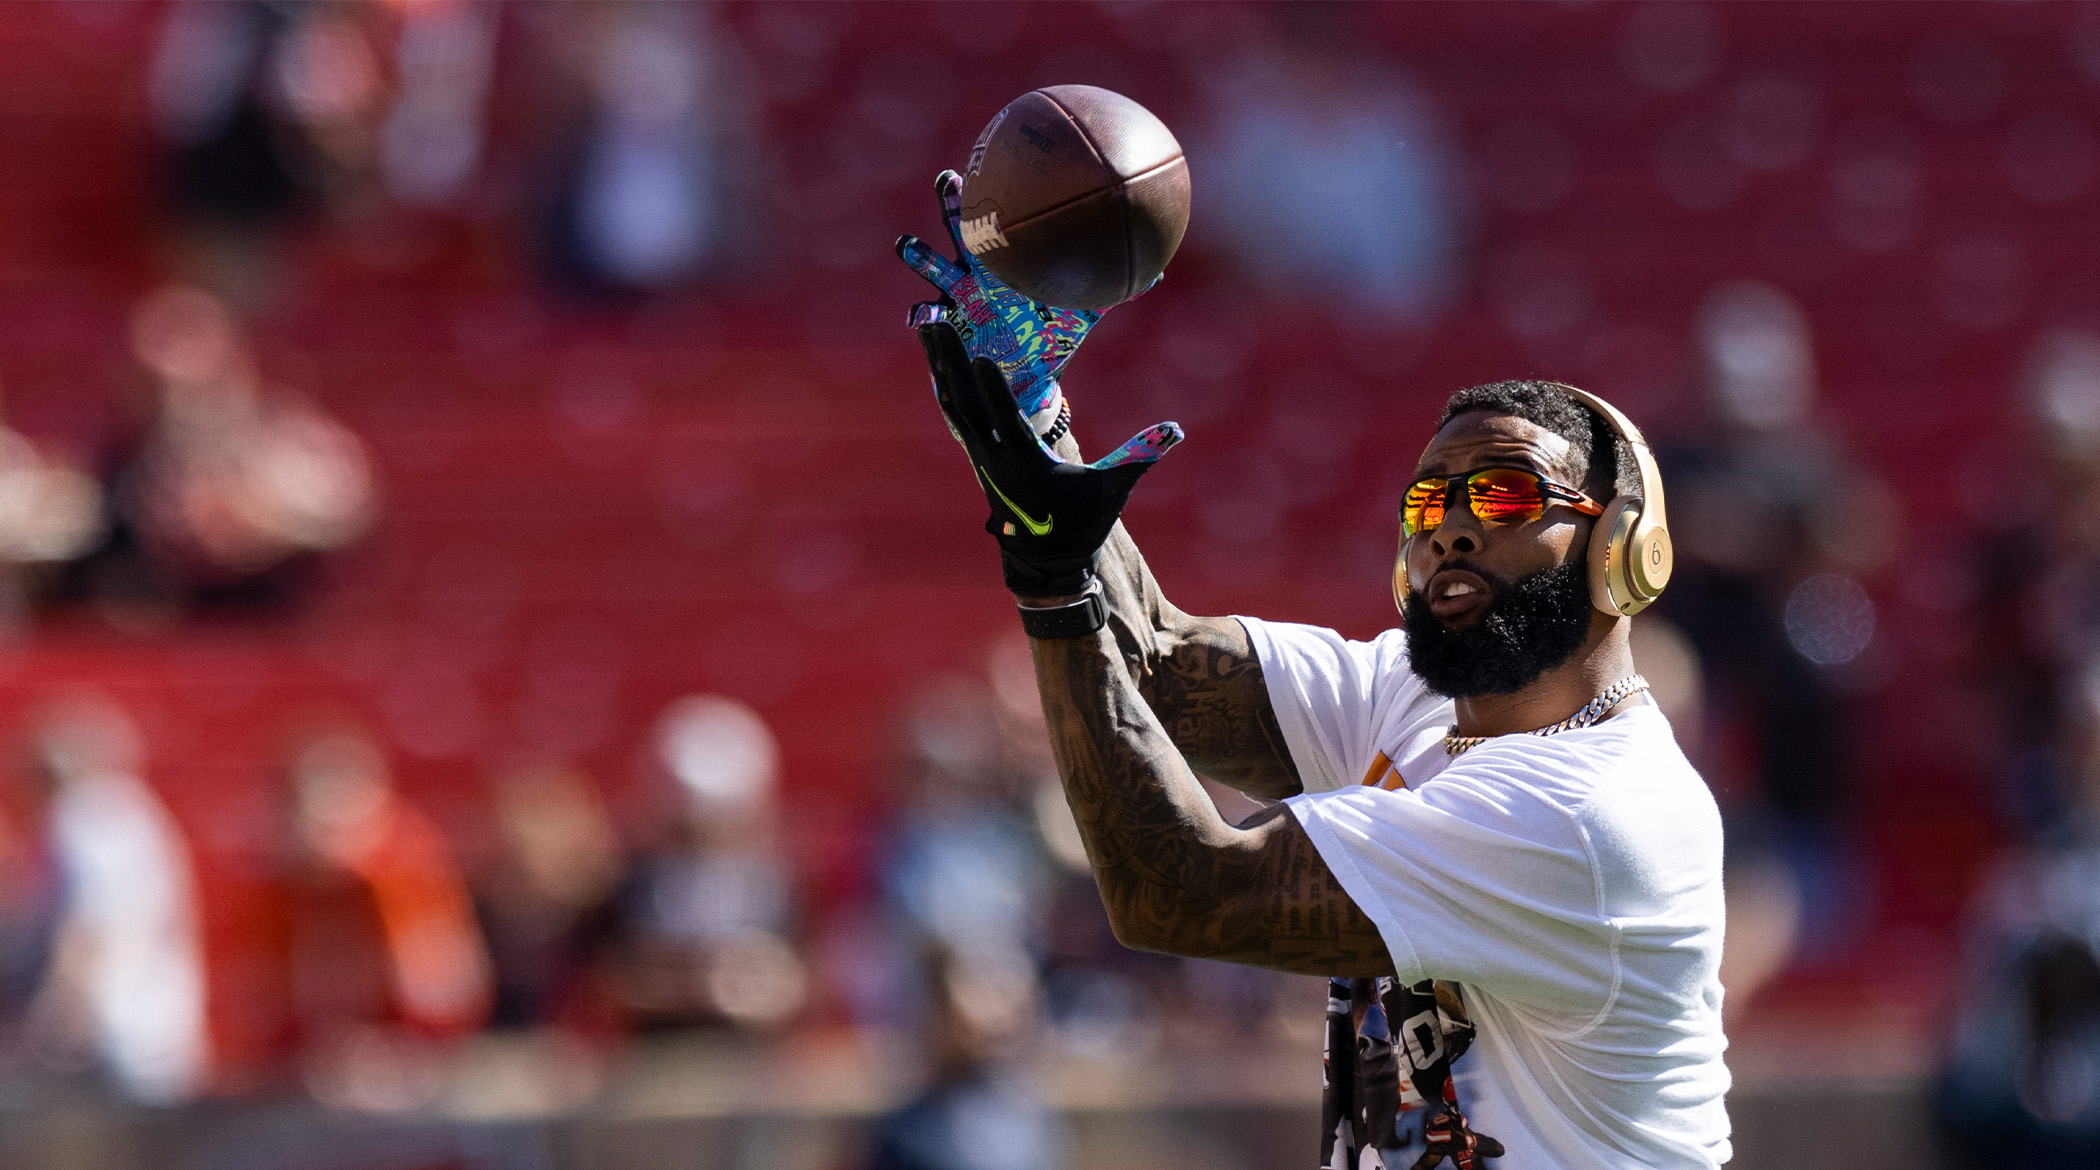 Sep 26, 2021; Cleveland, Ohio, USA; Cleveland Browns wide receiver Odell Beckham Jr. (13) catches the ball during warmups before the game against the Chicago Bears at FirstEnergy Stadium.